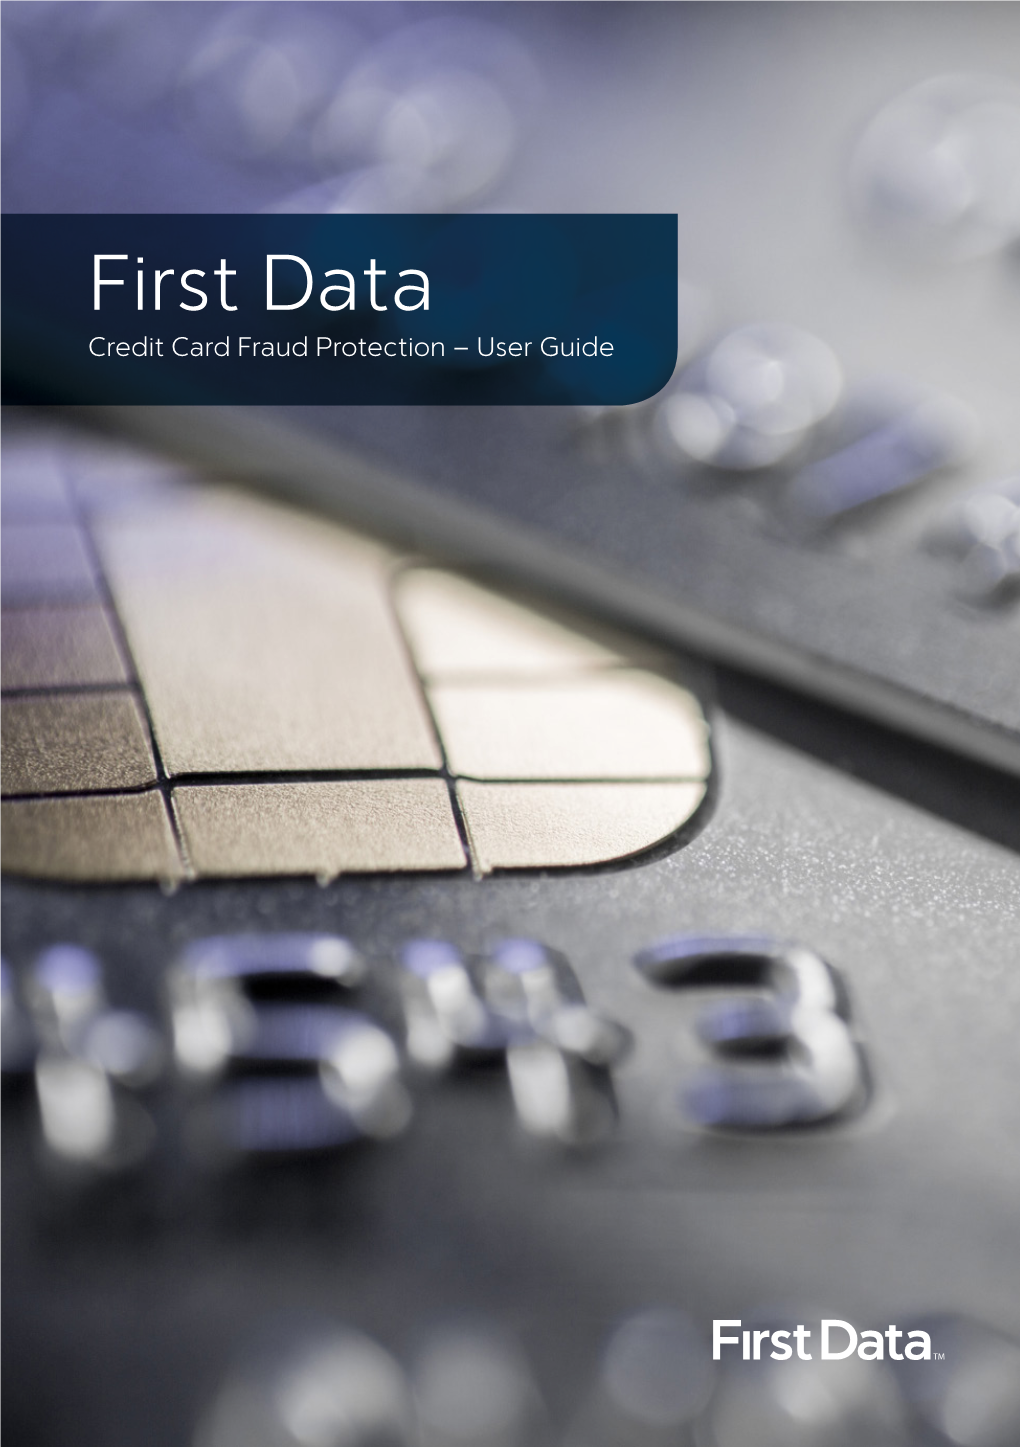 First Data Credit Card Fraud Protection – User Guide Contents: 1 How to Reduce the Risk of Card Present Fraud